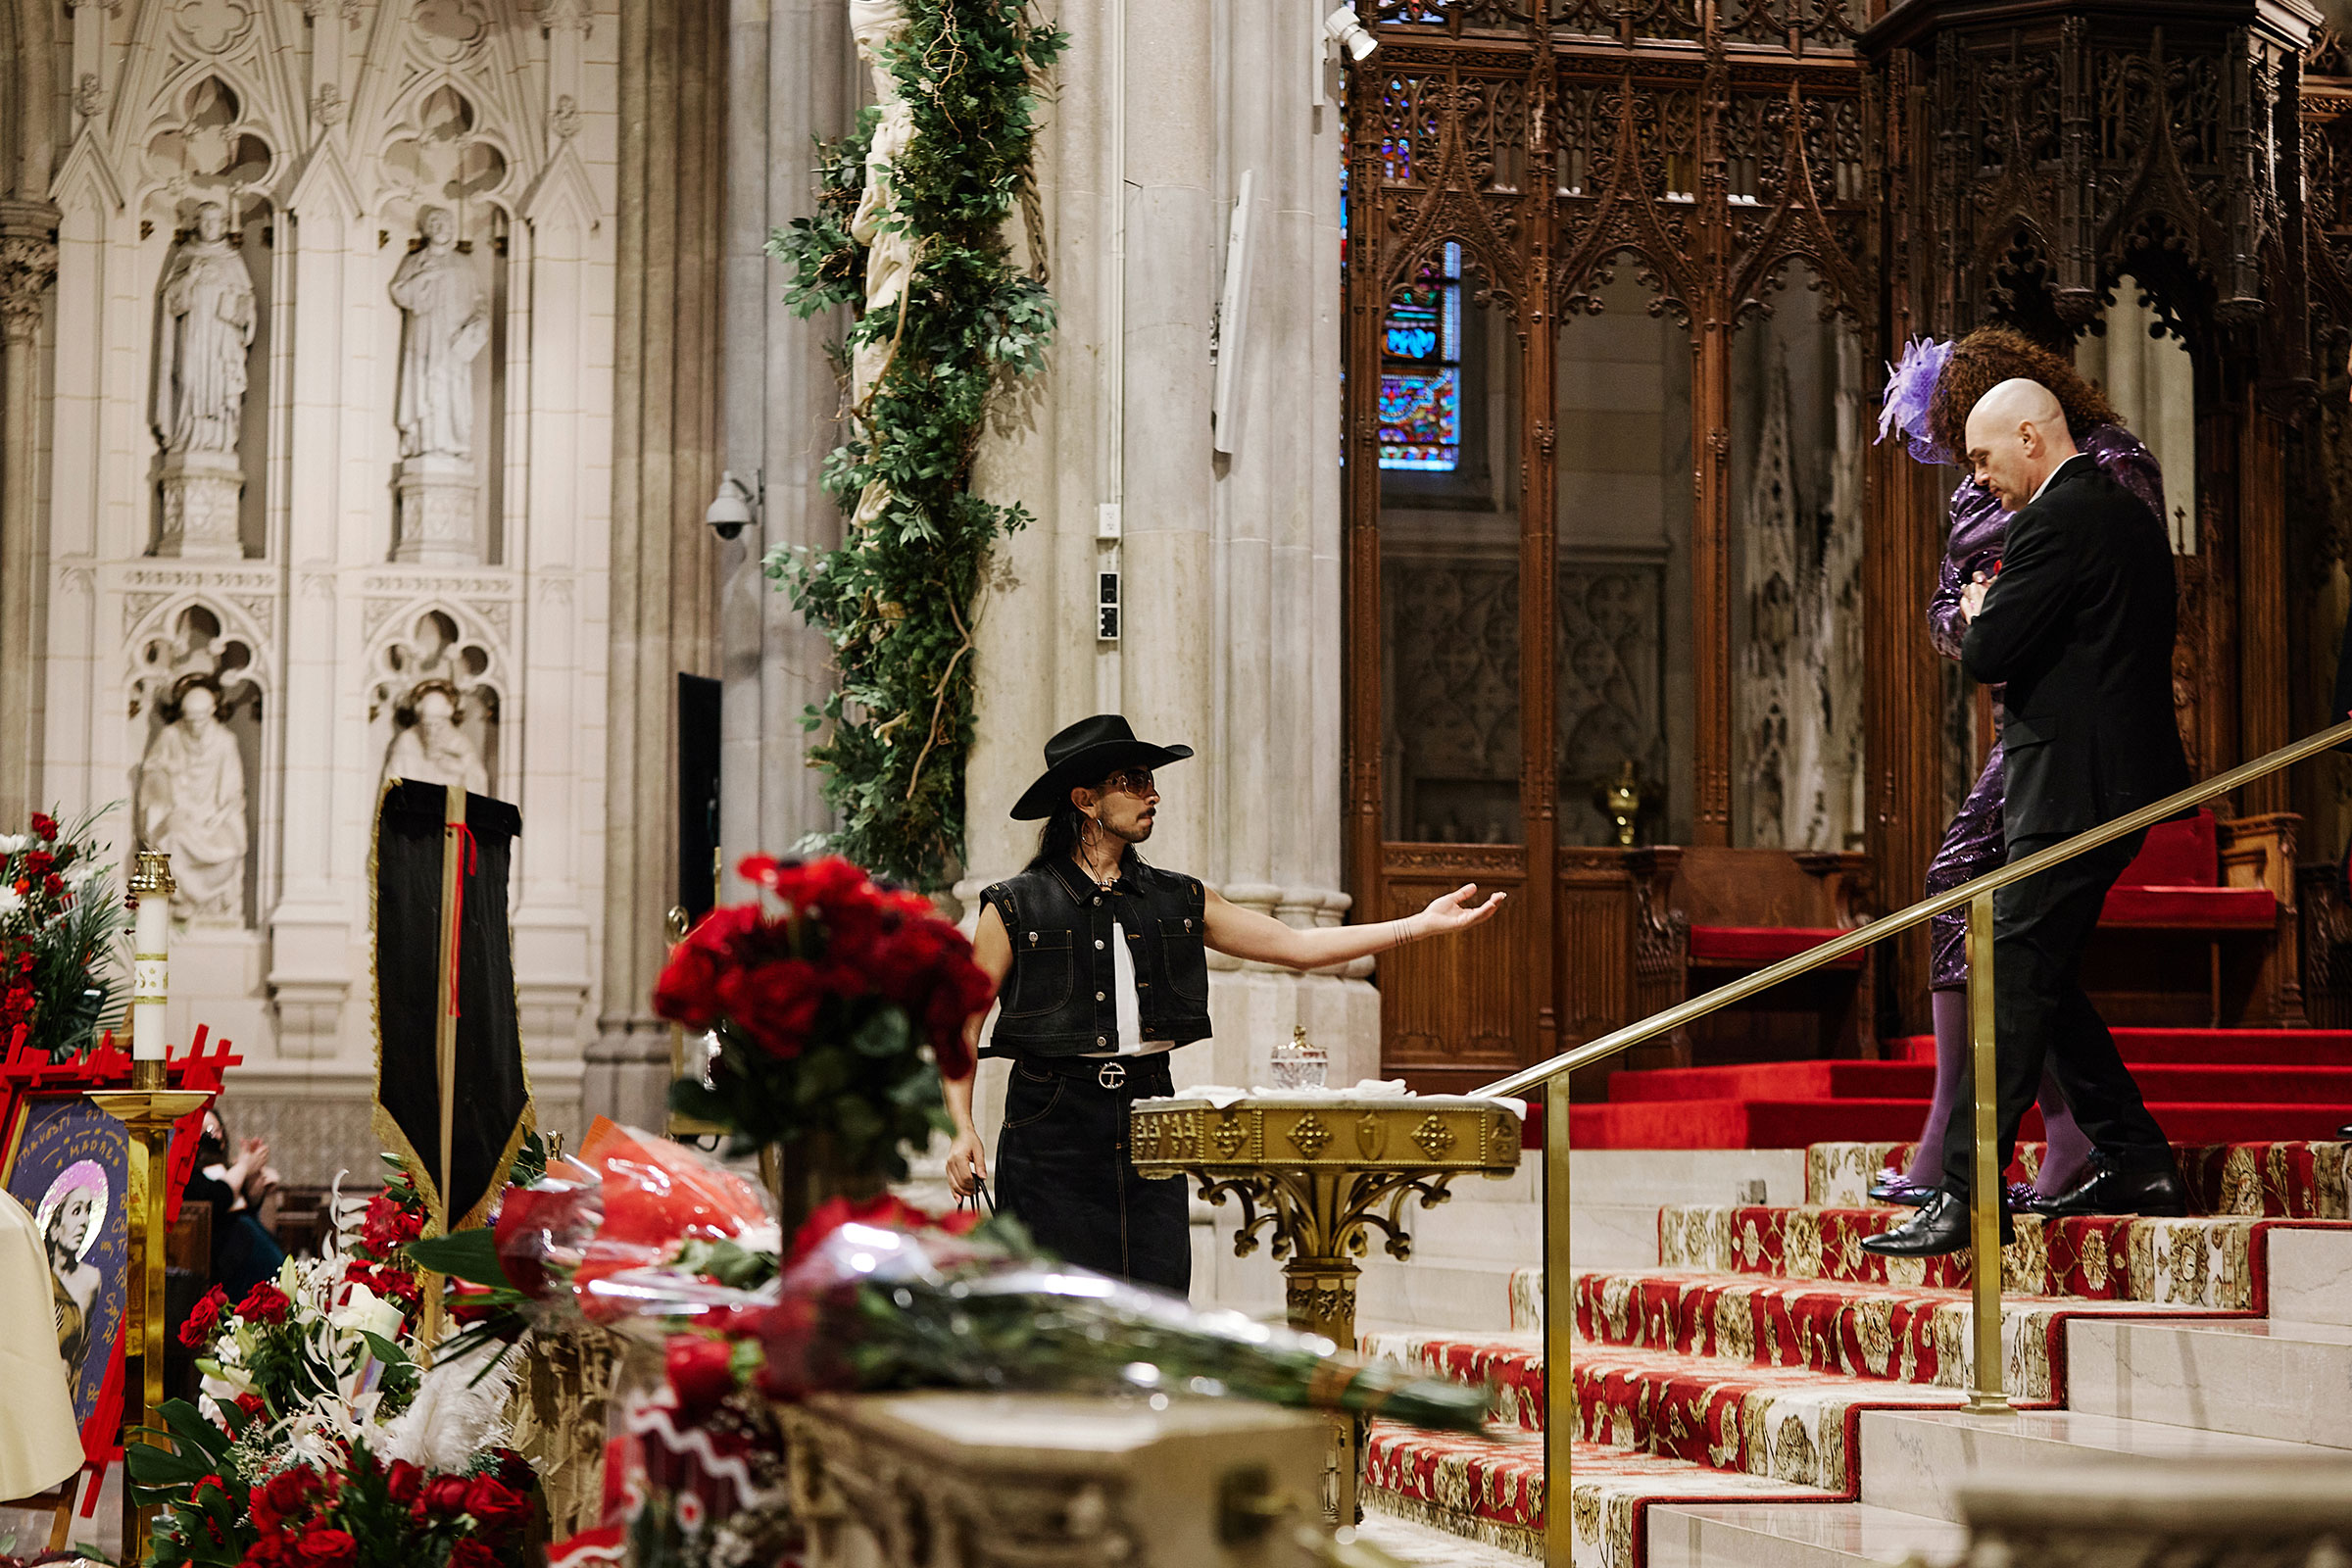 Oscar Diaz reaches out to Ceyenne Doroshow and Peter Scotto during the funeral services for Cecilia Gentili at St. Patricks Cathedral in New York City, on Feb. 15, 2024.